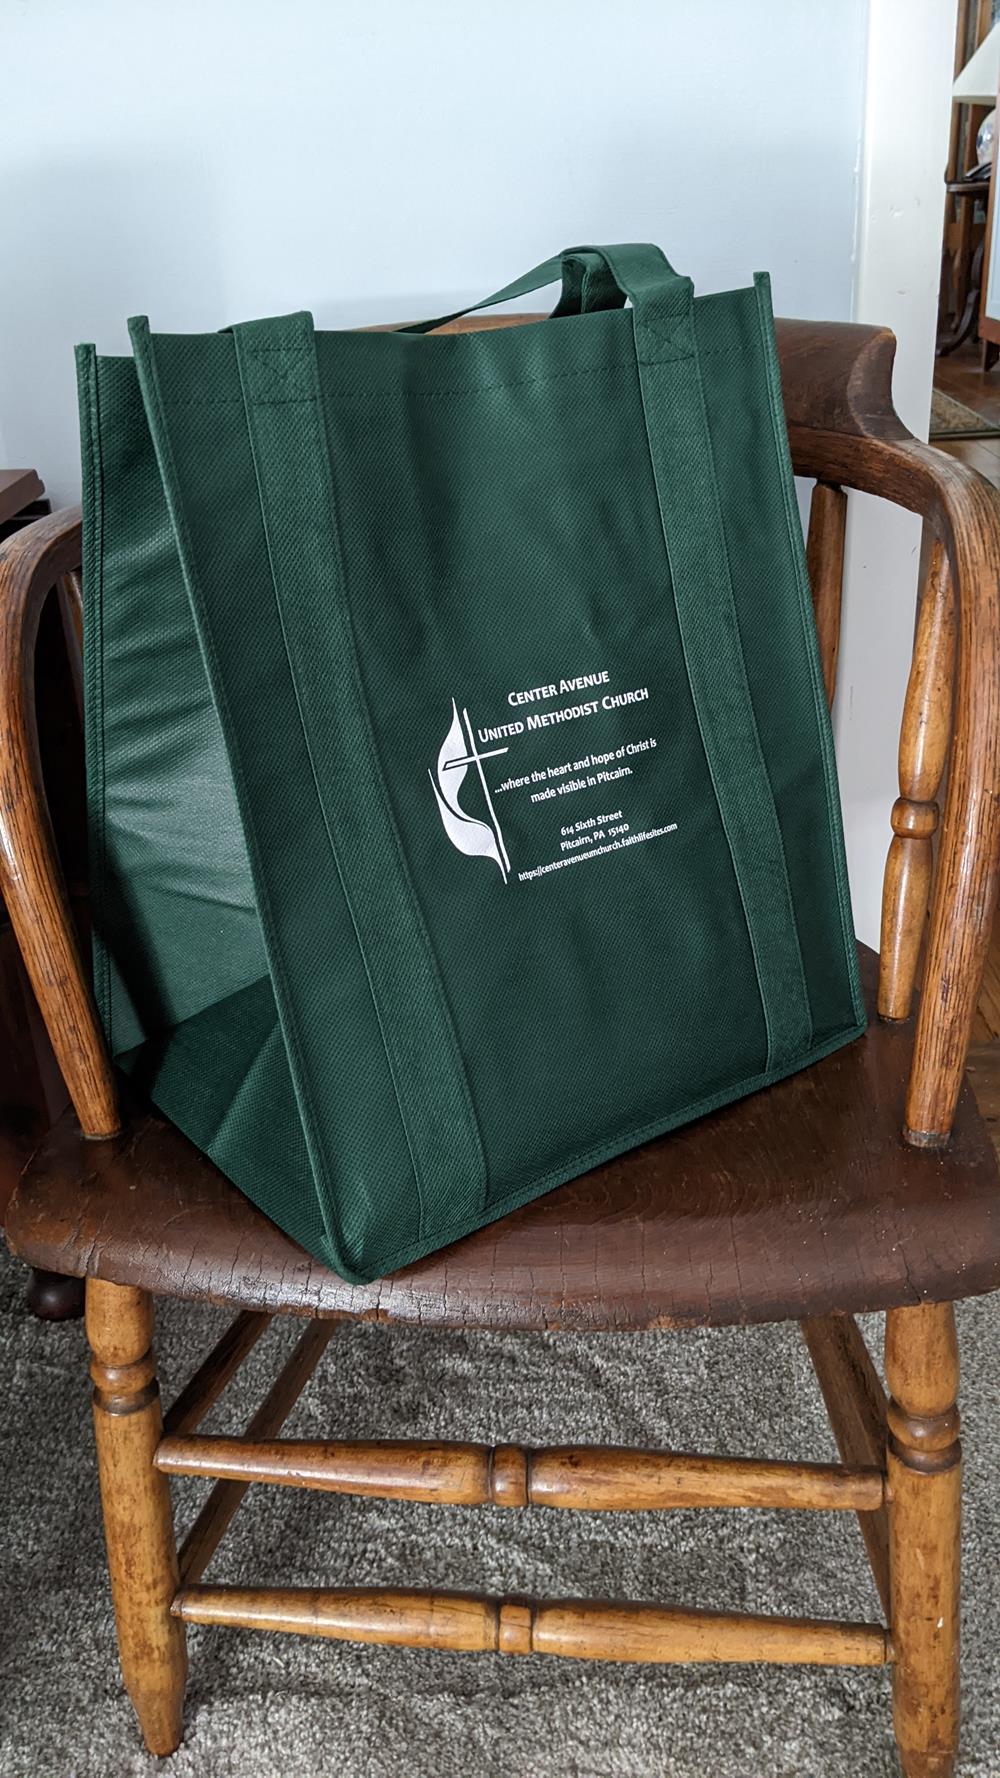 a green bag on a chair